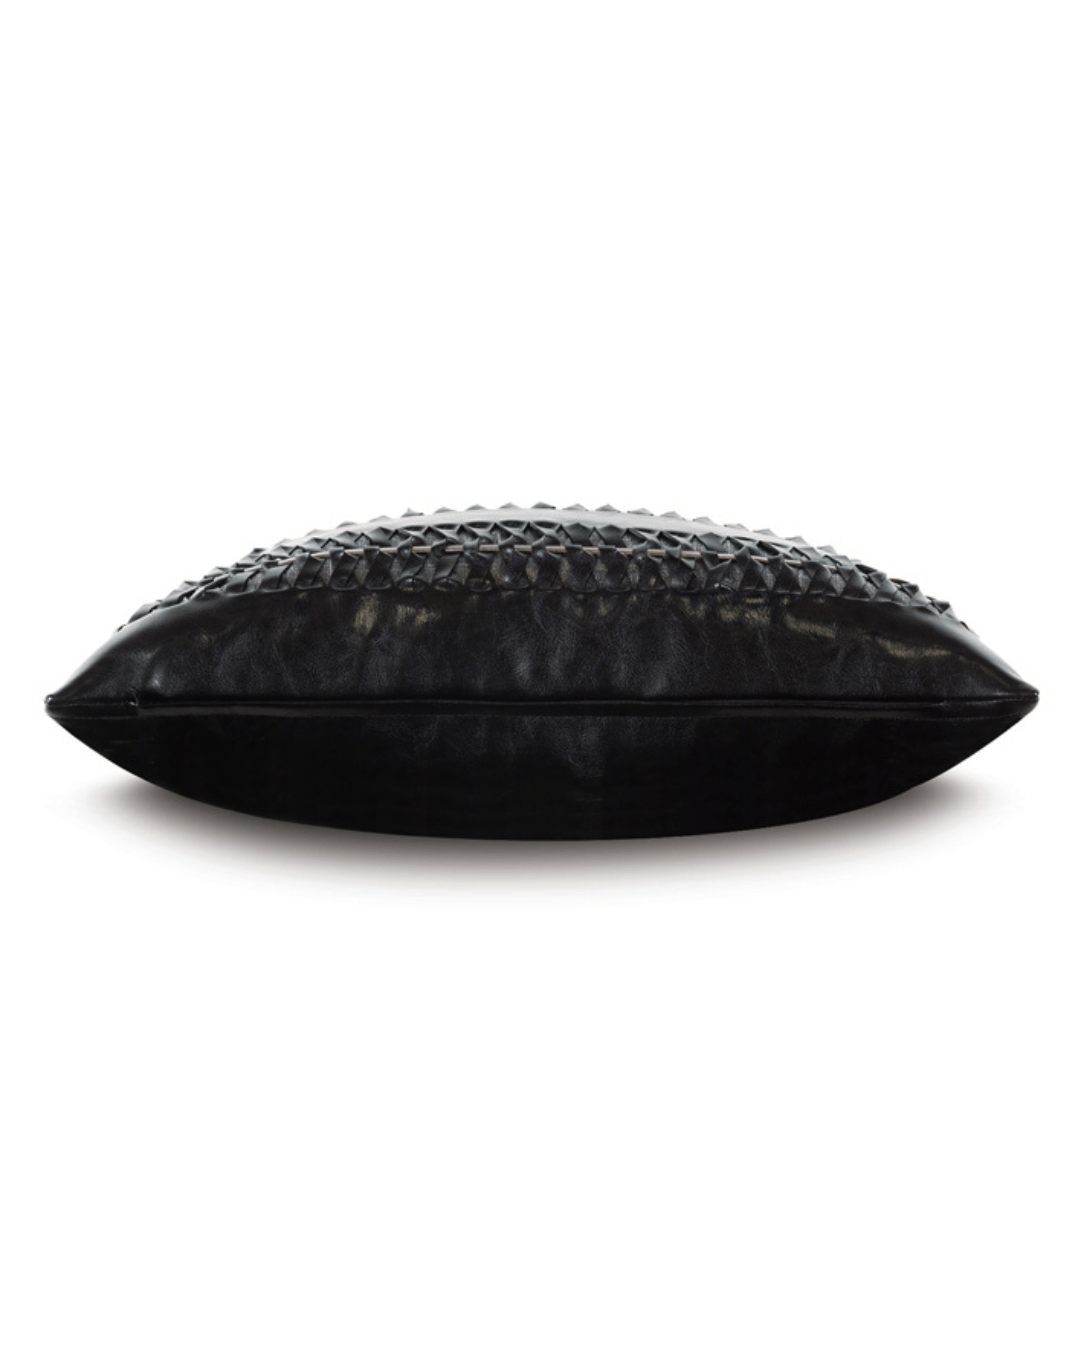 A black leather Braid Ink Pillow with a textured, woven pattern on the upper side, inspired by Scottsdale Arizona, presented against a white background. (Brand Name: Eastern Accents)